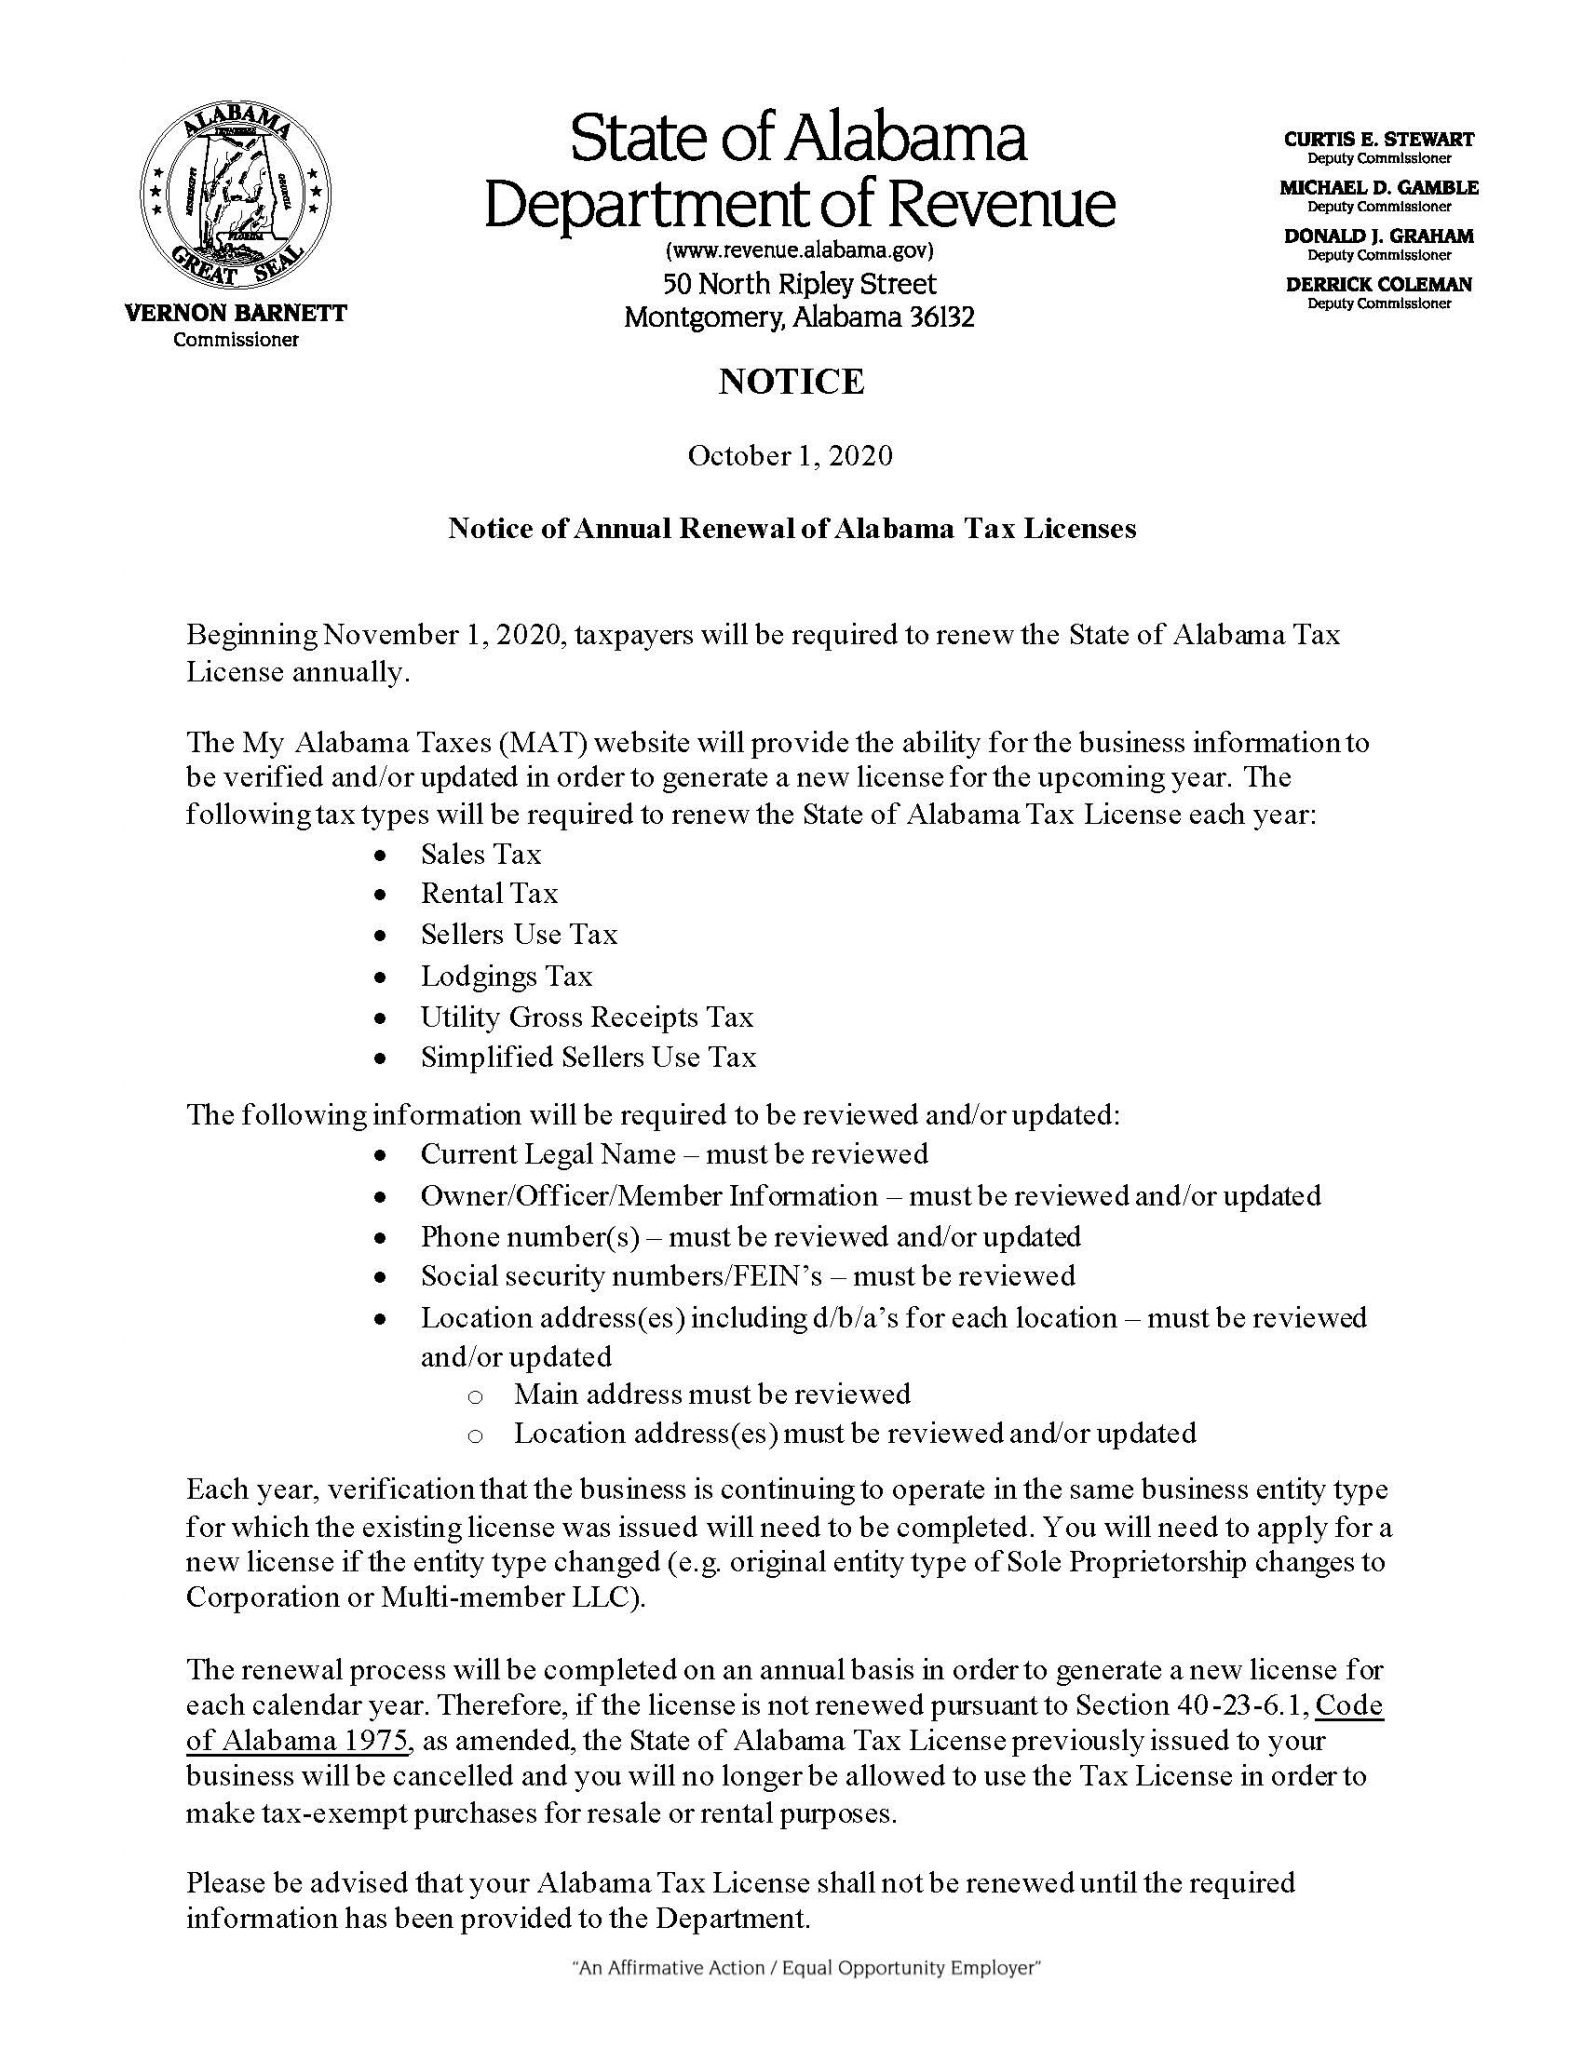 Crow Shields Bailey PC Notice Of Annual Renewal Of Alabama Tax Licenses